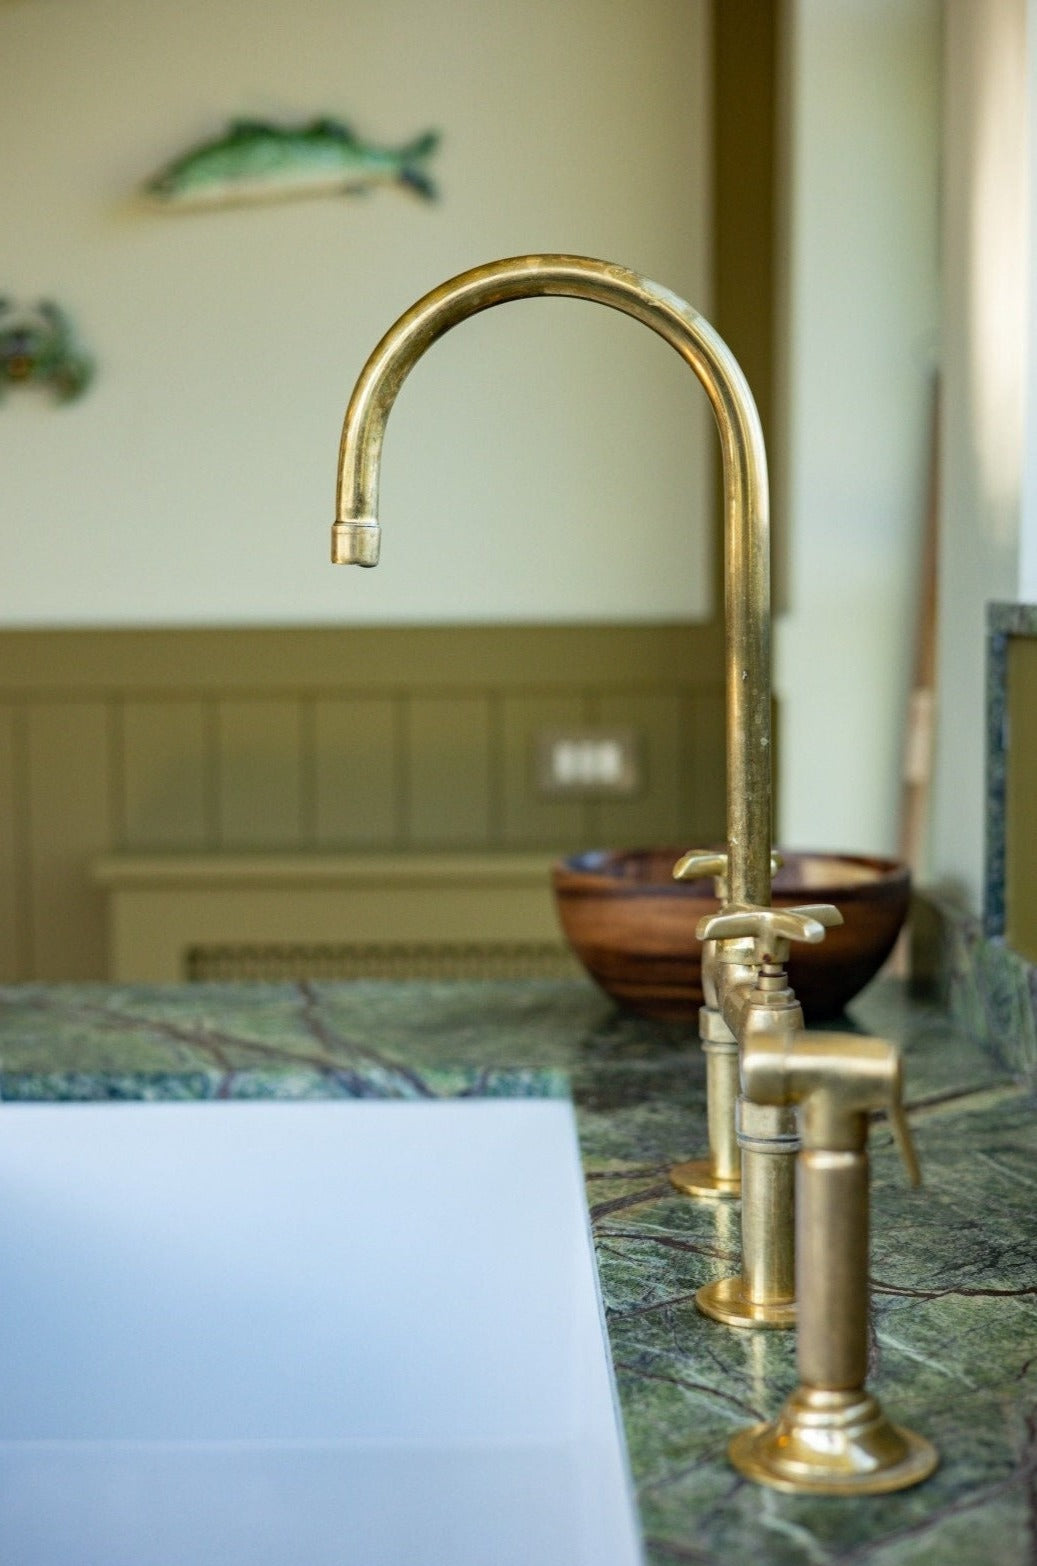 Unlacquered Brass Kitchen Faucet With Linear Legs - Solid Brass Bridge Faucet - Kitchen Faucets